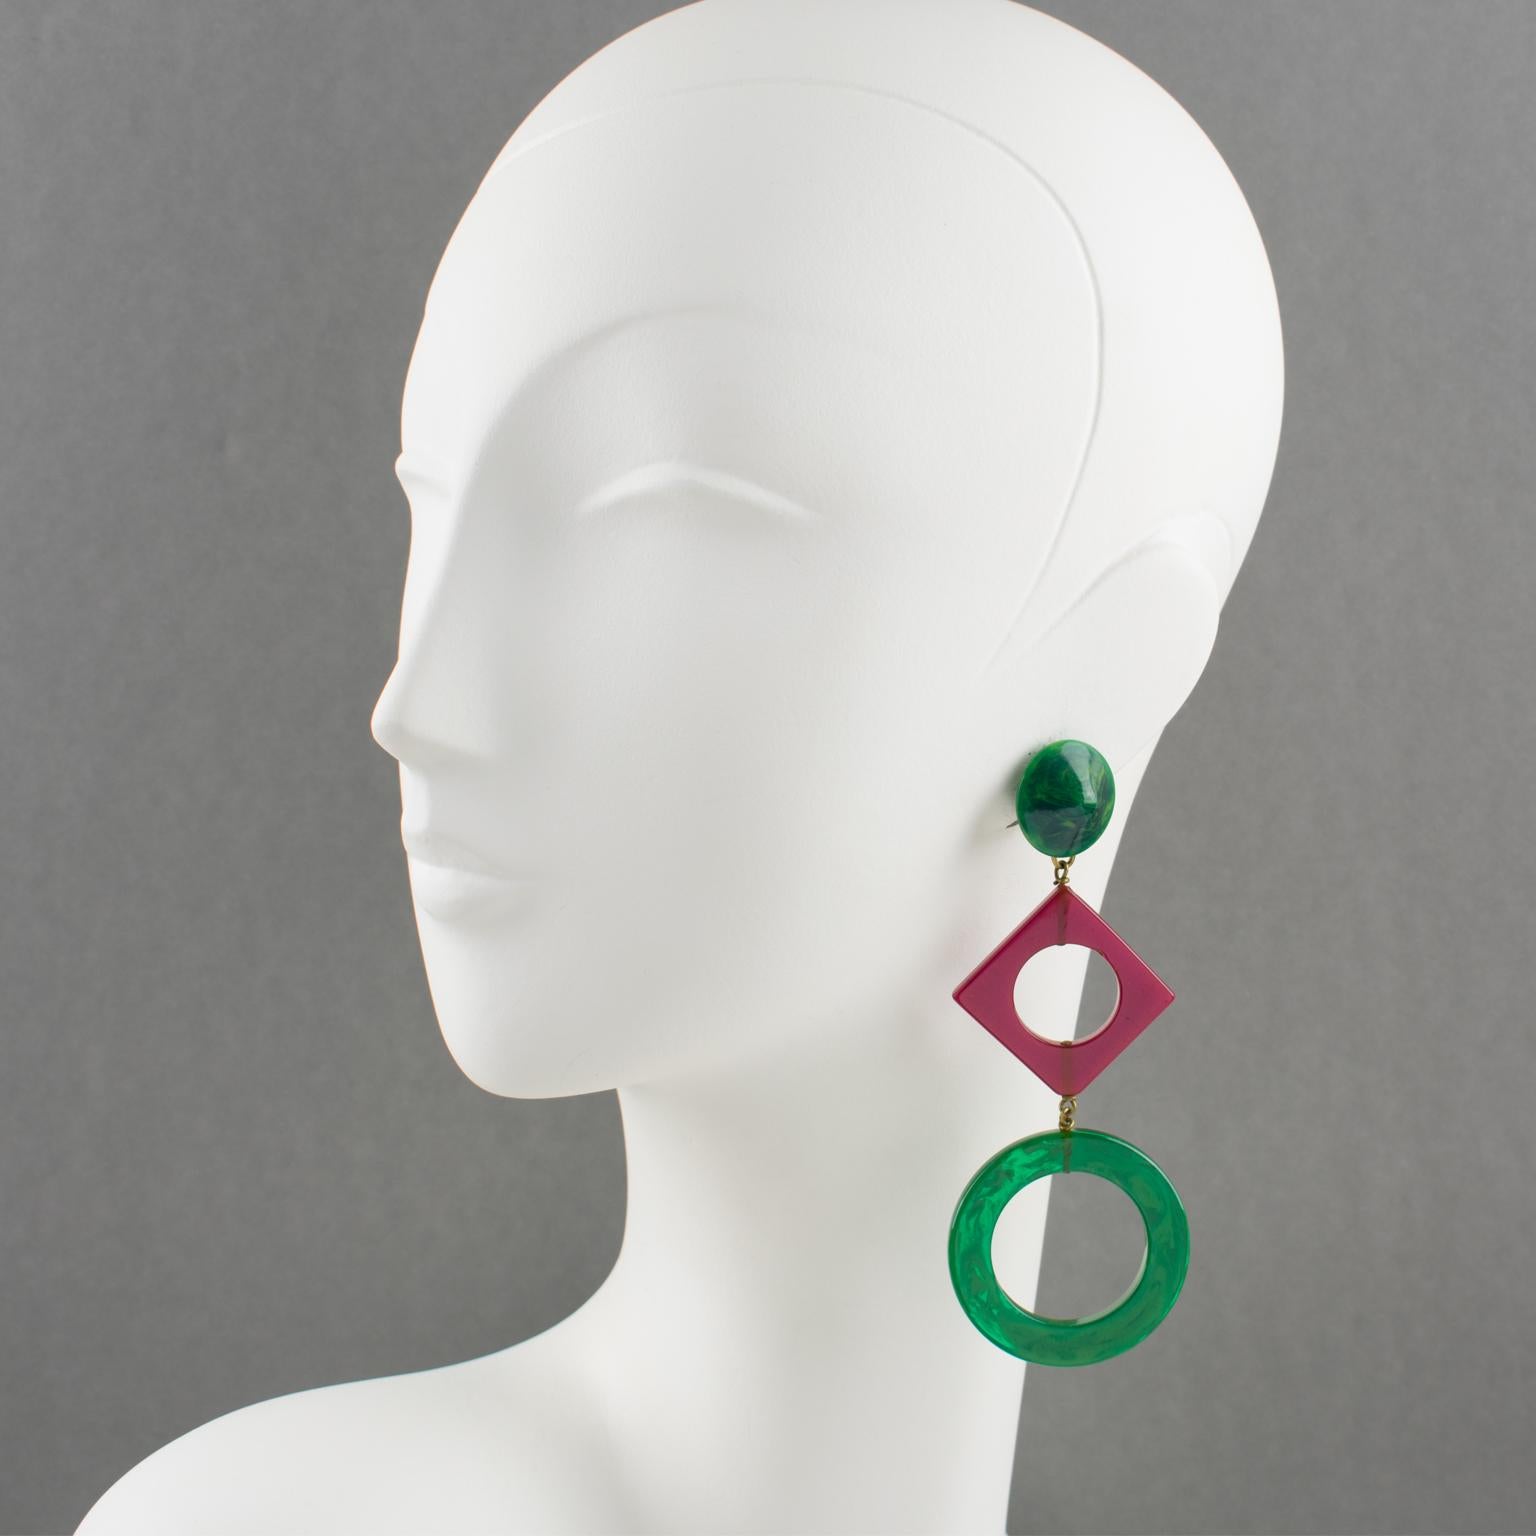 These stunning extra-long Bakelite dangling clip-on earrings have an undeniable Pop Art design flair. They feature a chandelier shape with a geometric design using square donuts and large ring forms in blue-moon green marble and purple plum colors.